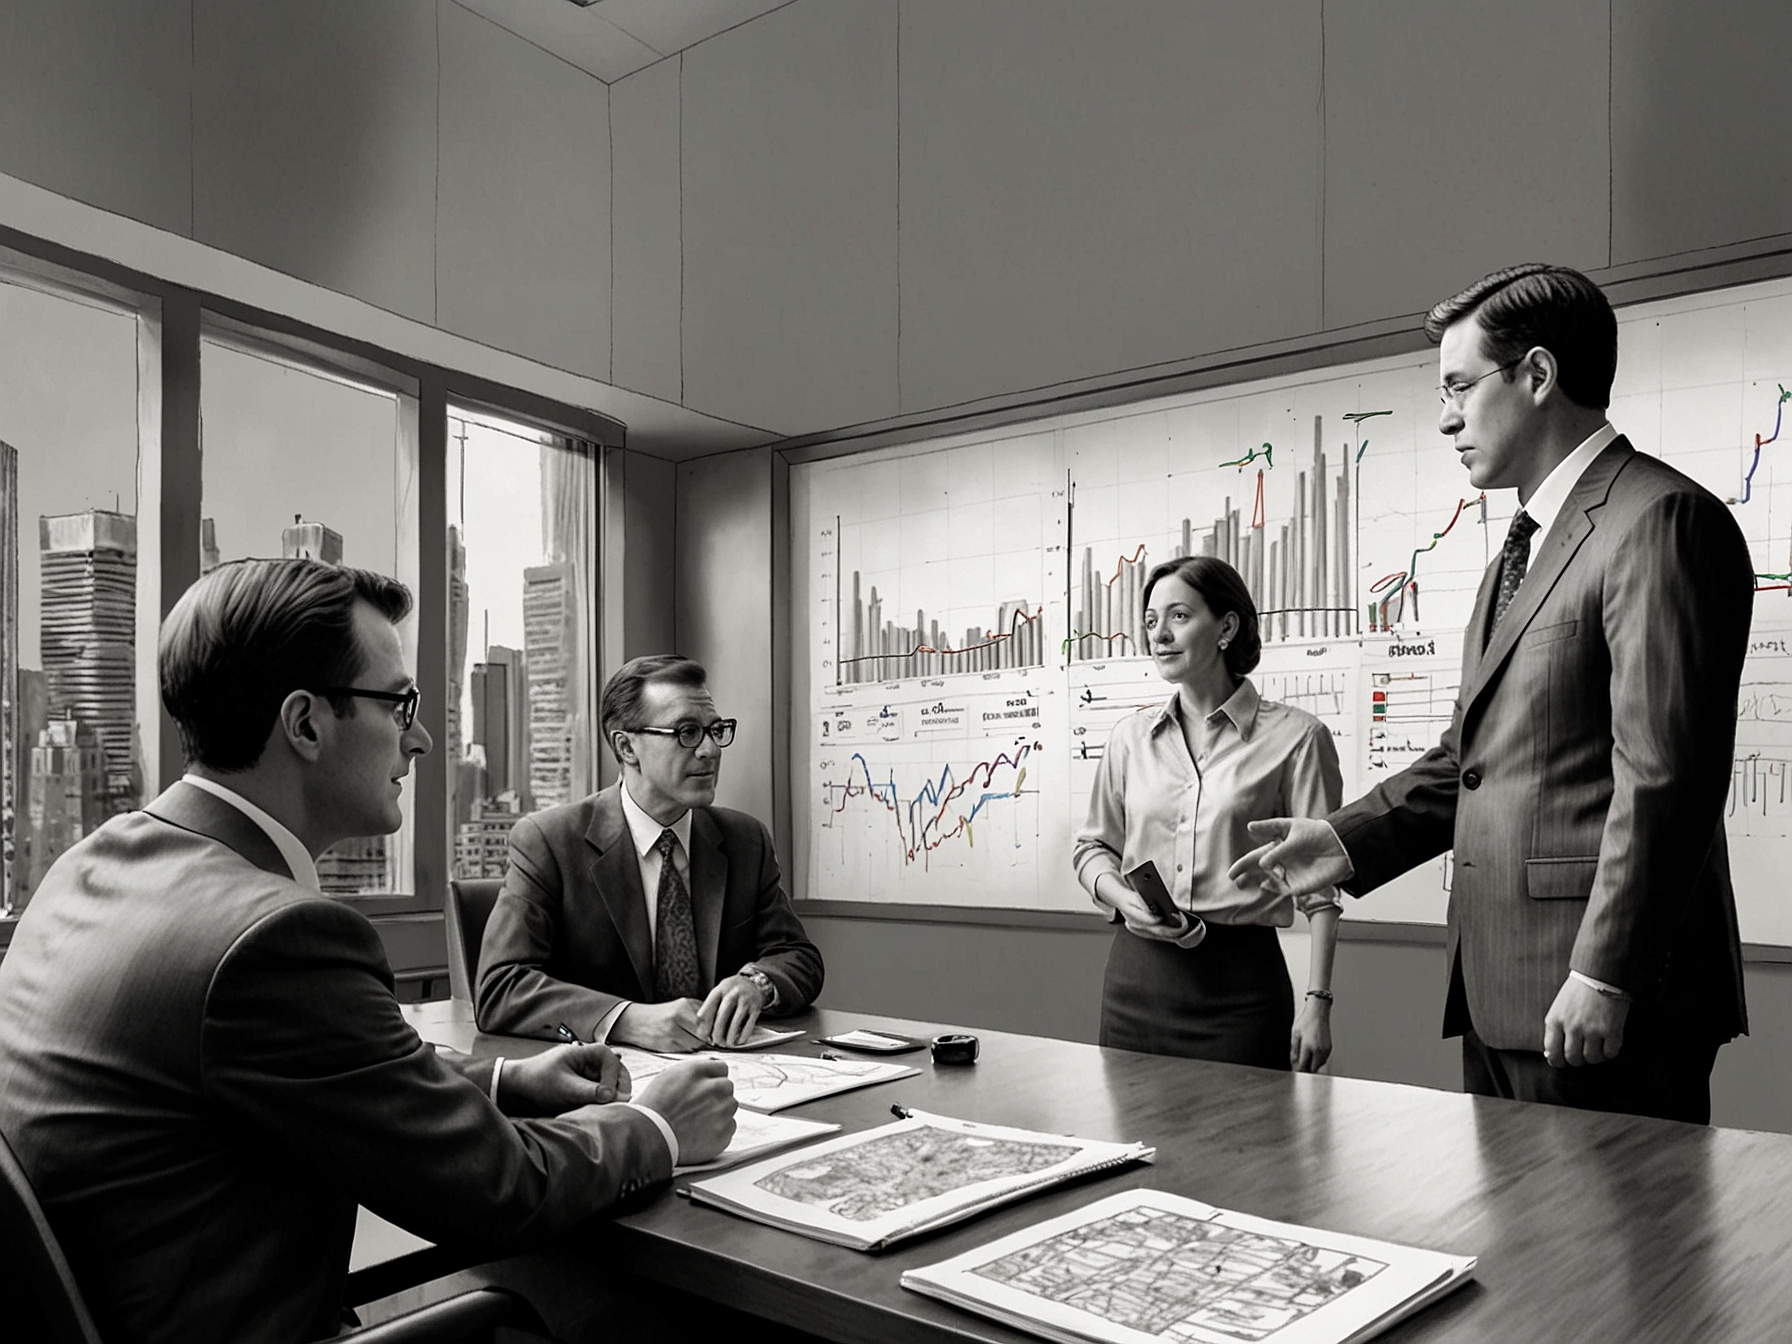 An illustration showing a financial advisor presenting market analysis to sponsors, emphasizing cautious decision-making in a volatile economic environment.